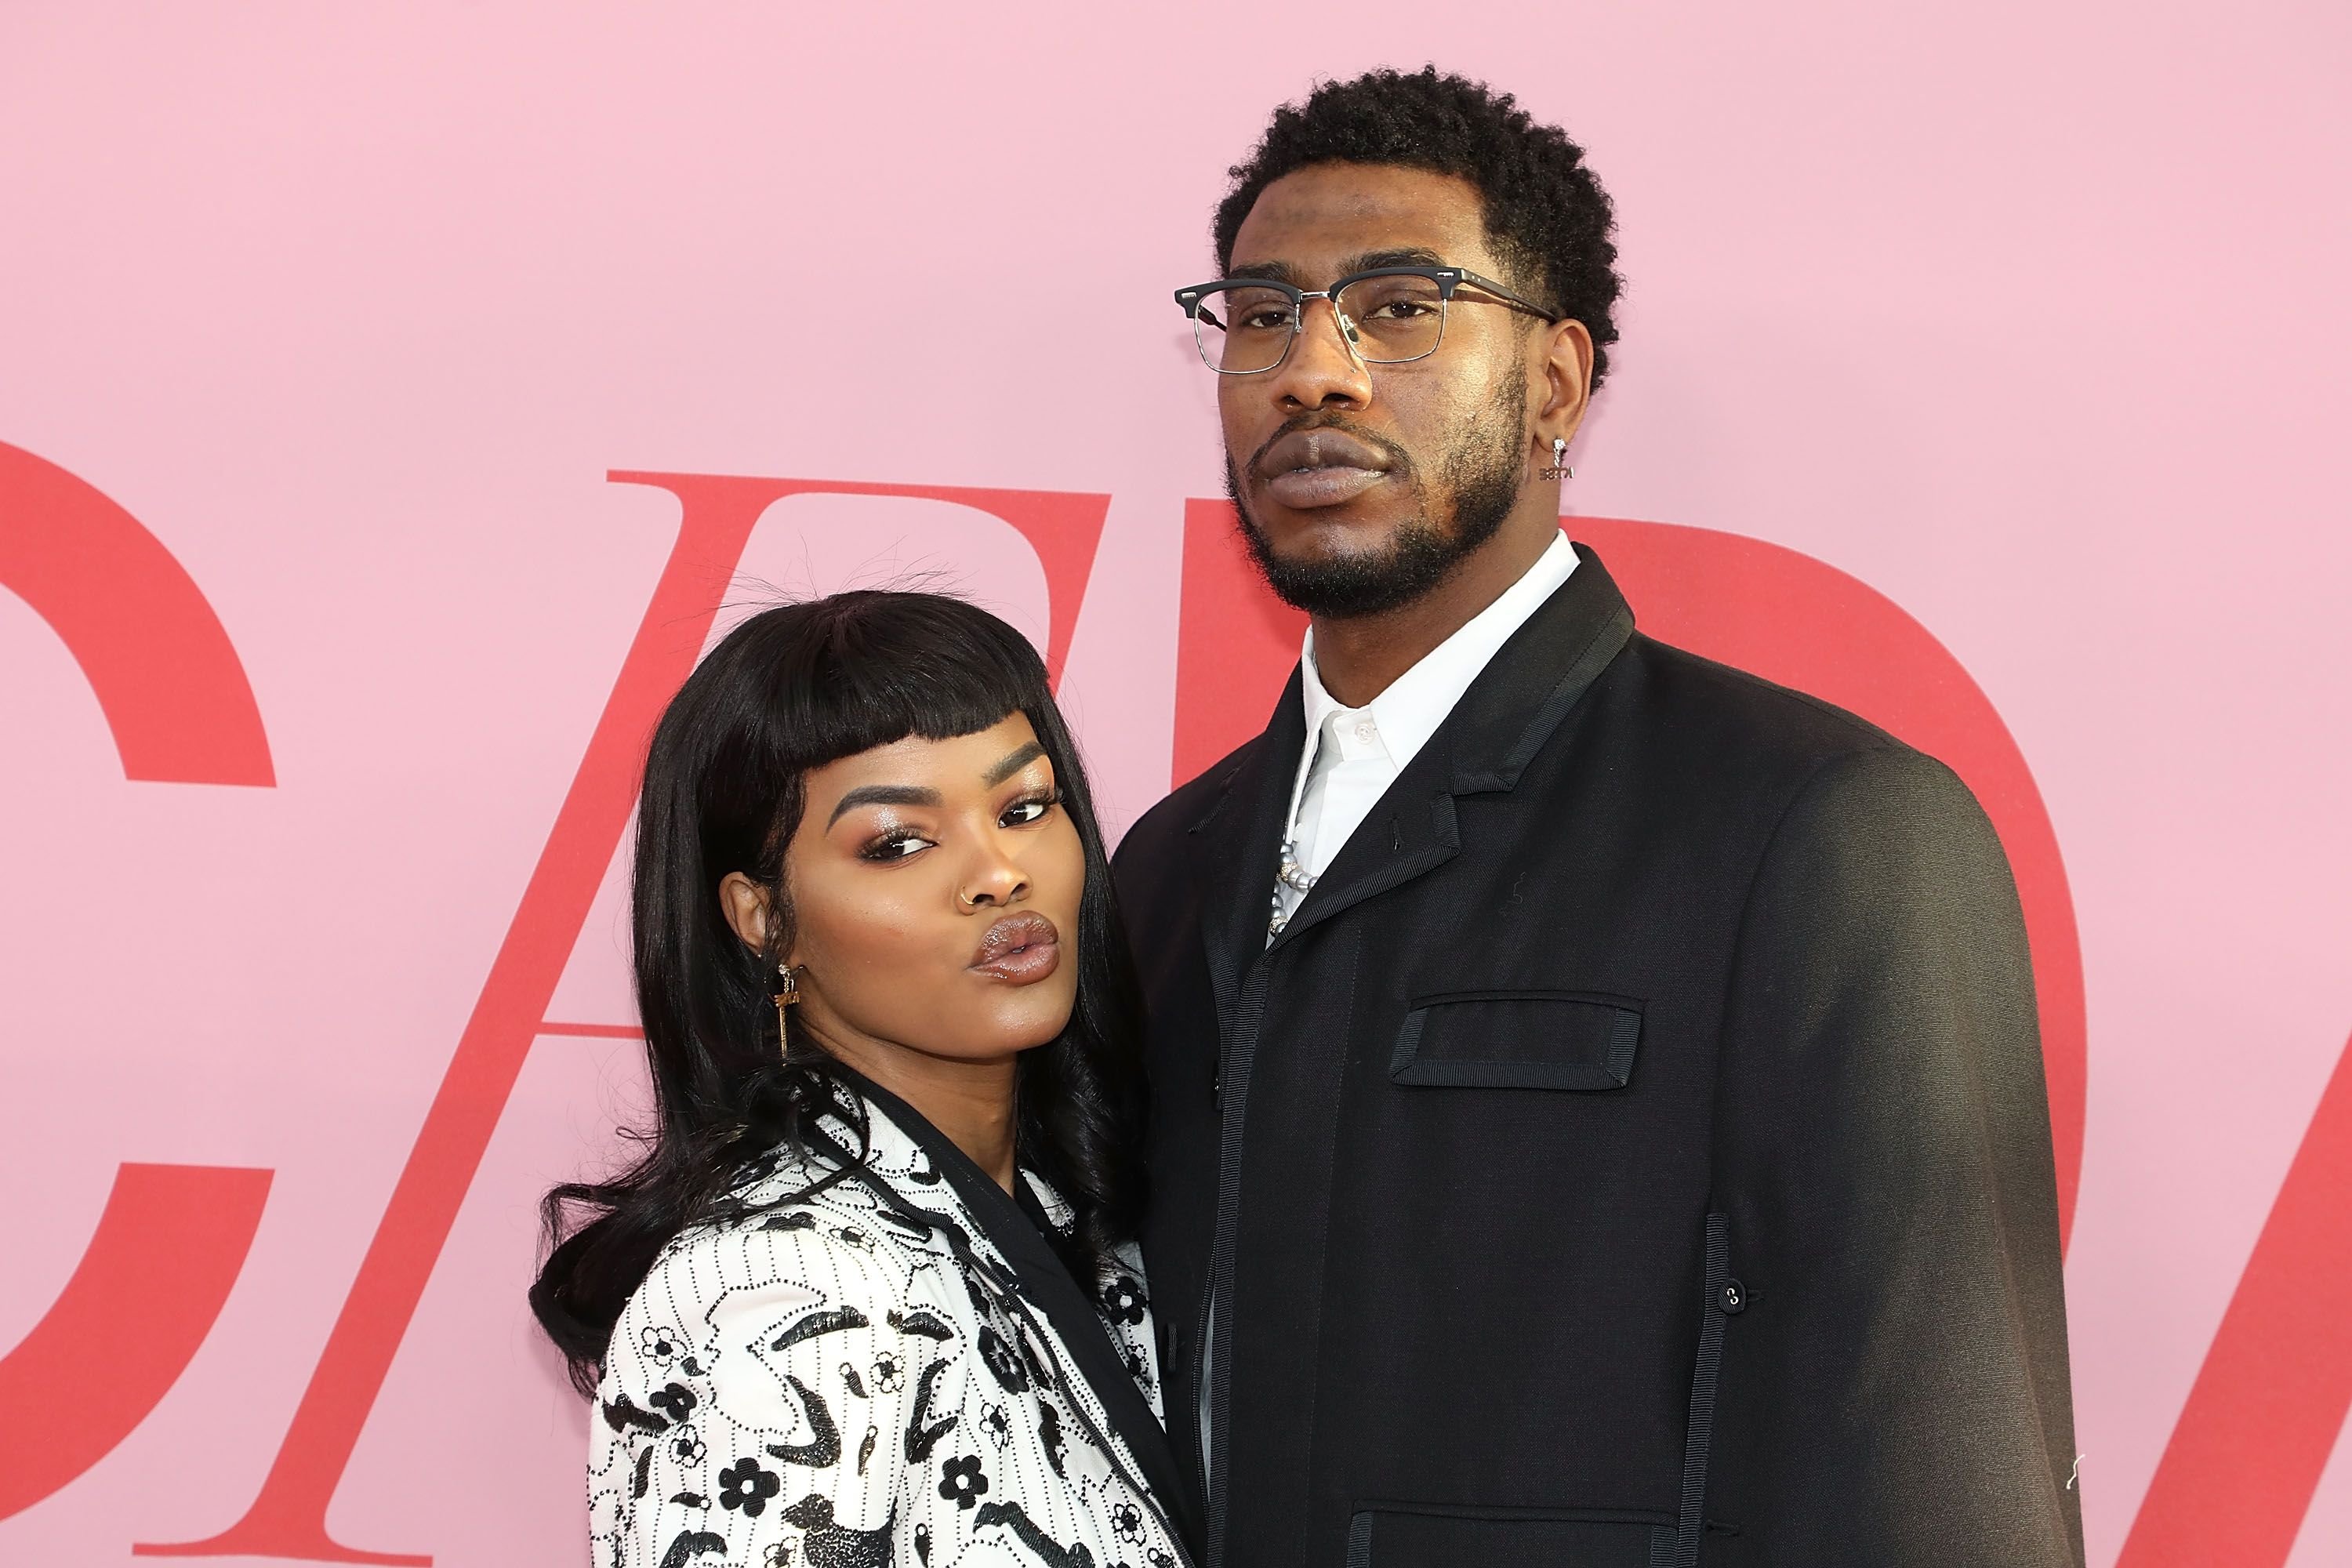 Teyana Taylor and Iman Shumpert at the 2019 CFDA Awards in June 2019 in New York City | Source: Getty Images